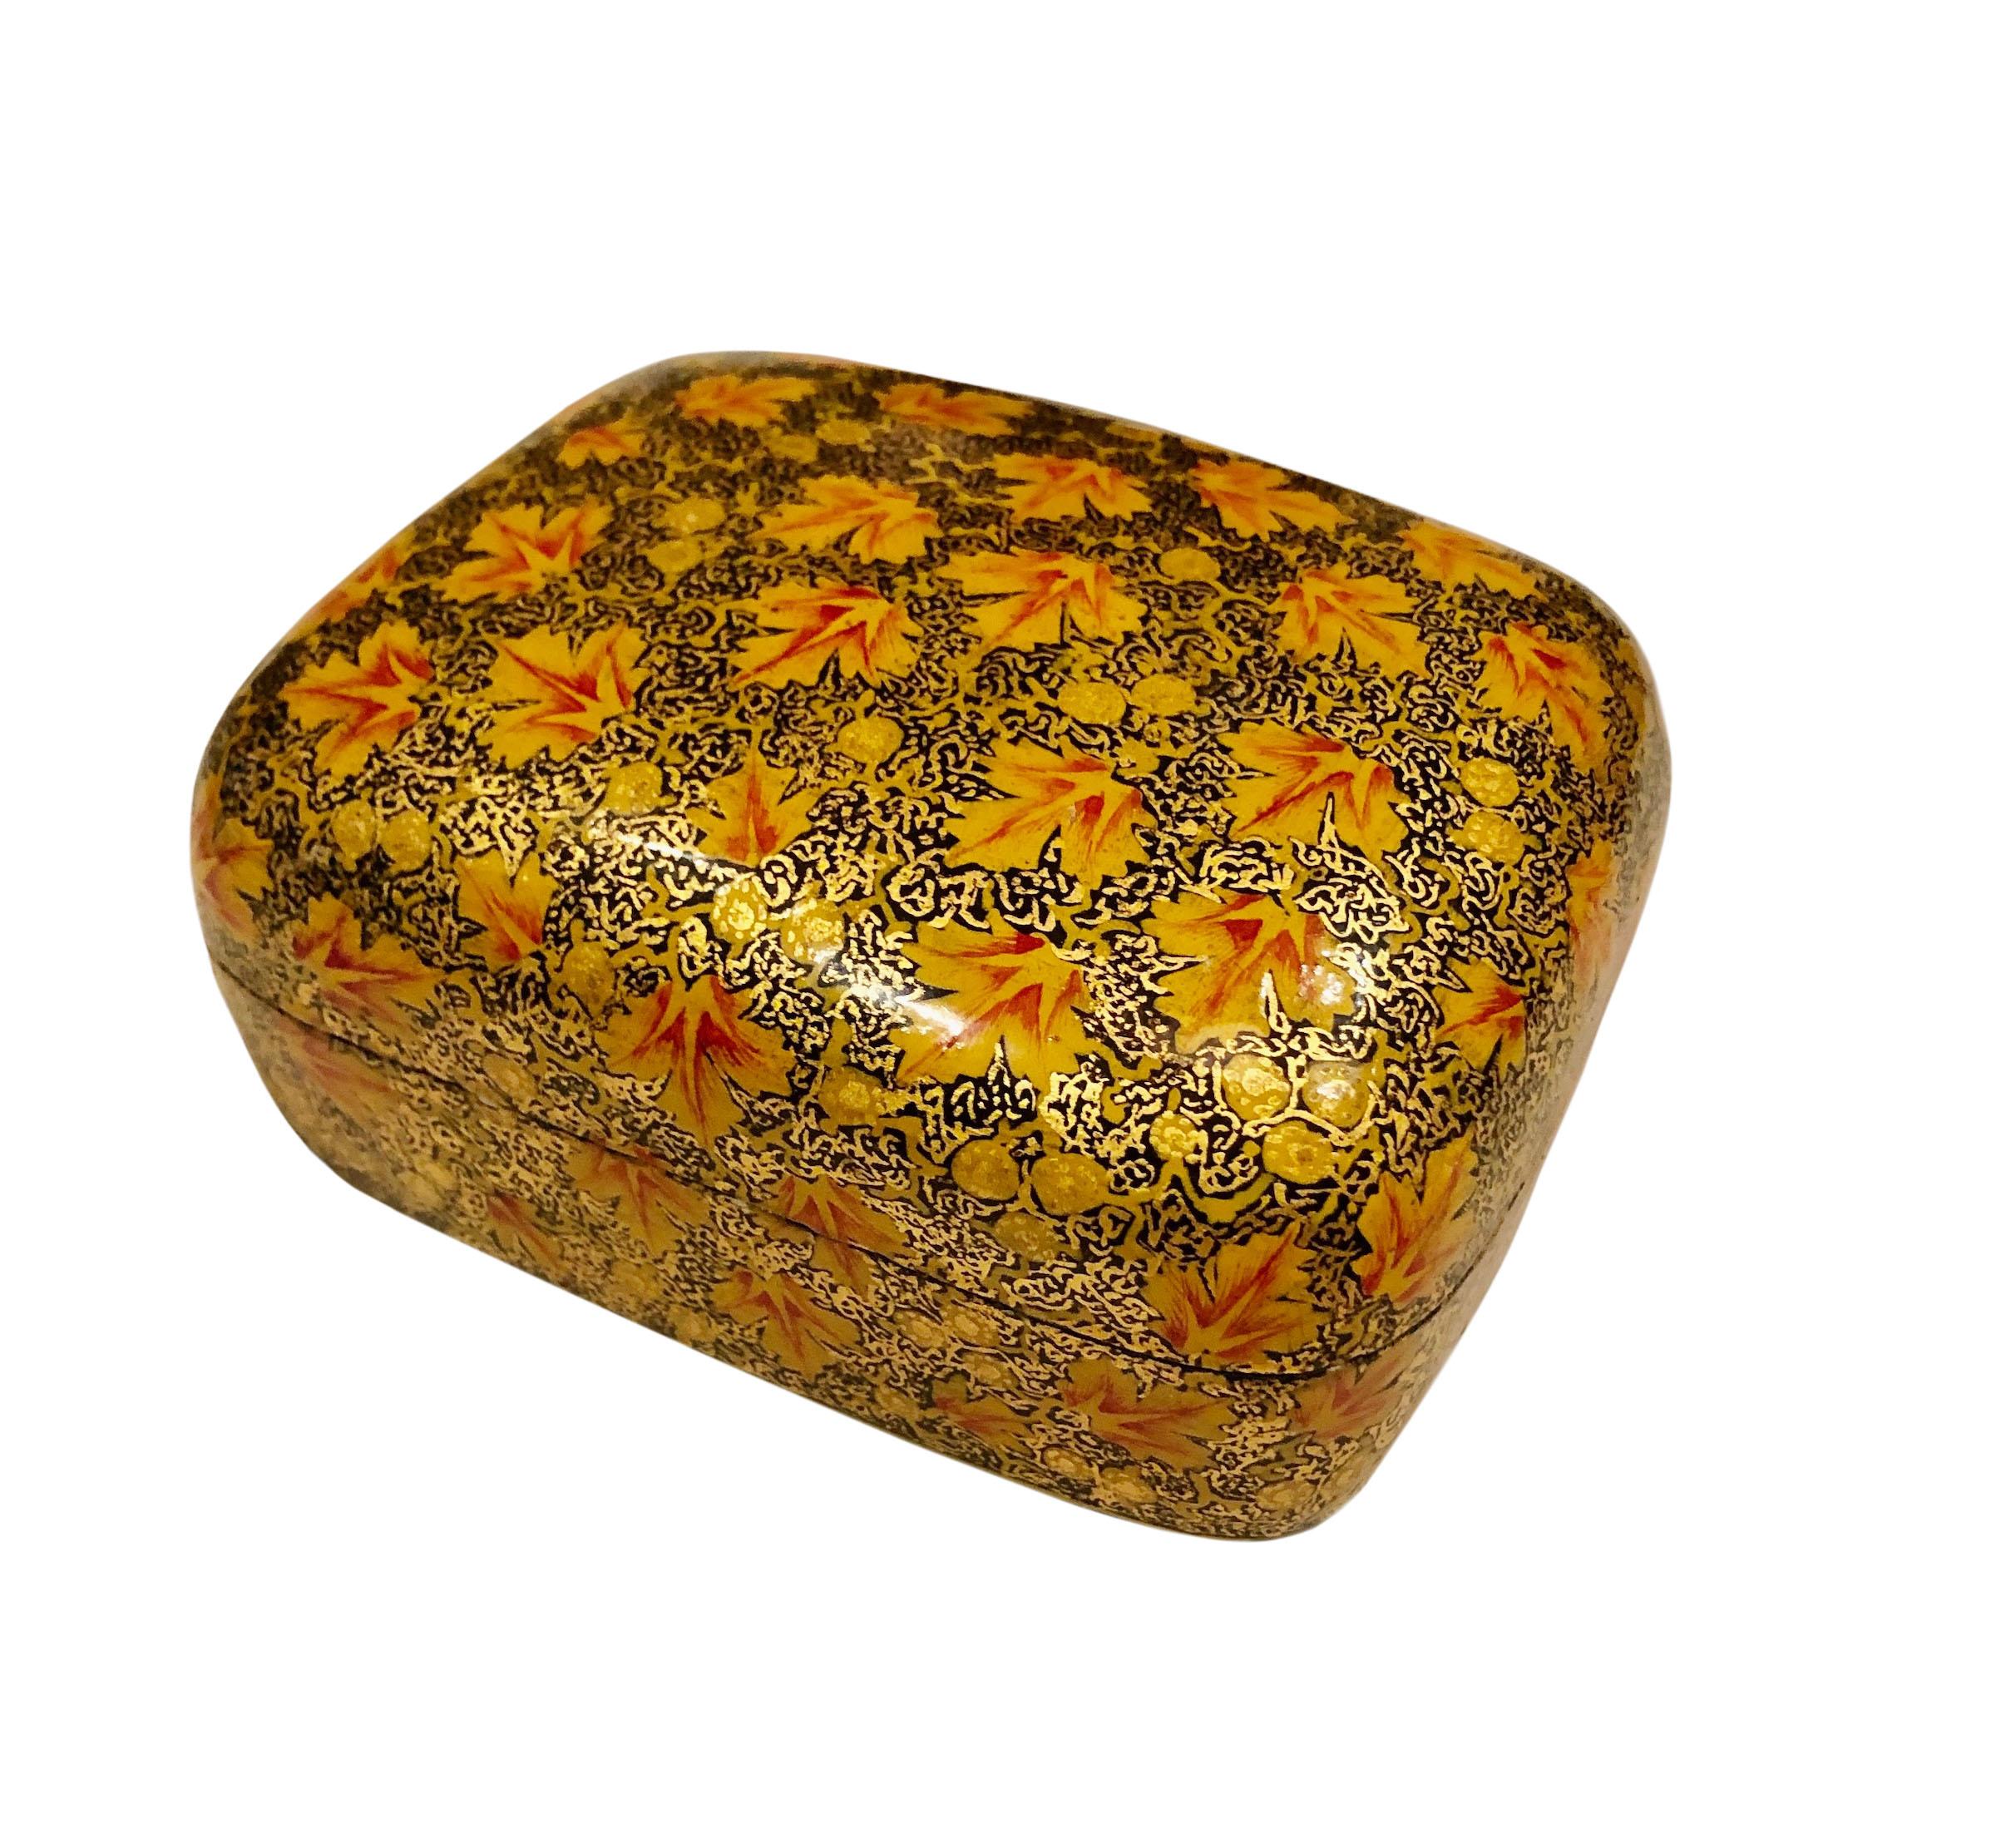 A 1960s hand painted papier mâché box with a domed top from Kashmir India. The box is orange and gold hand painted papier mâché with a white interior the bottom is black.
 